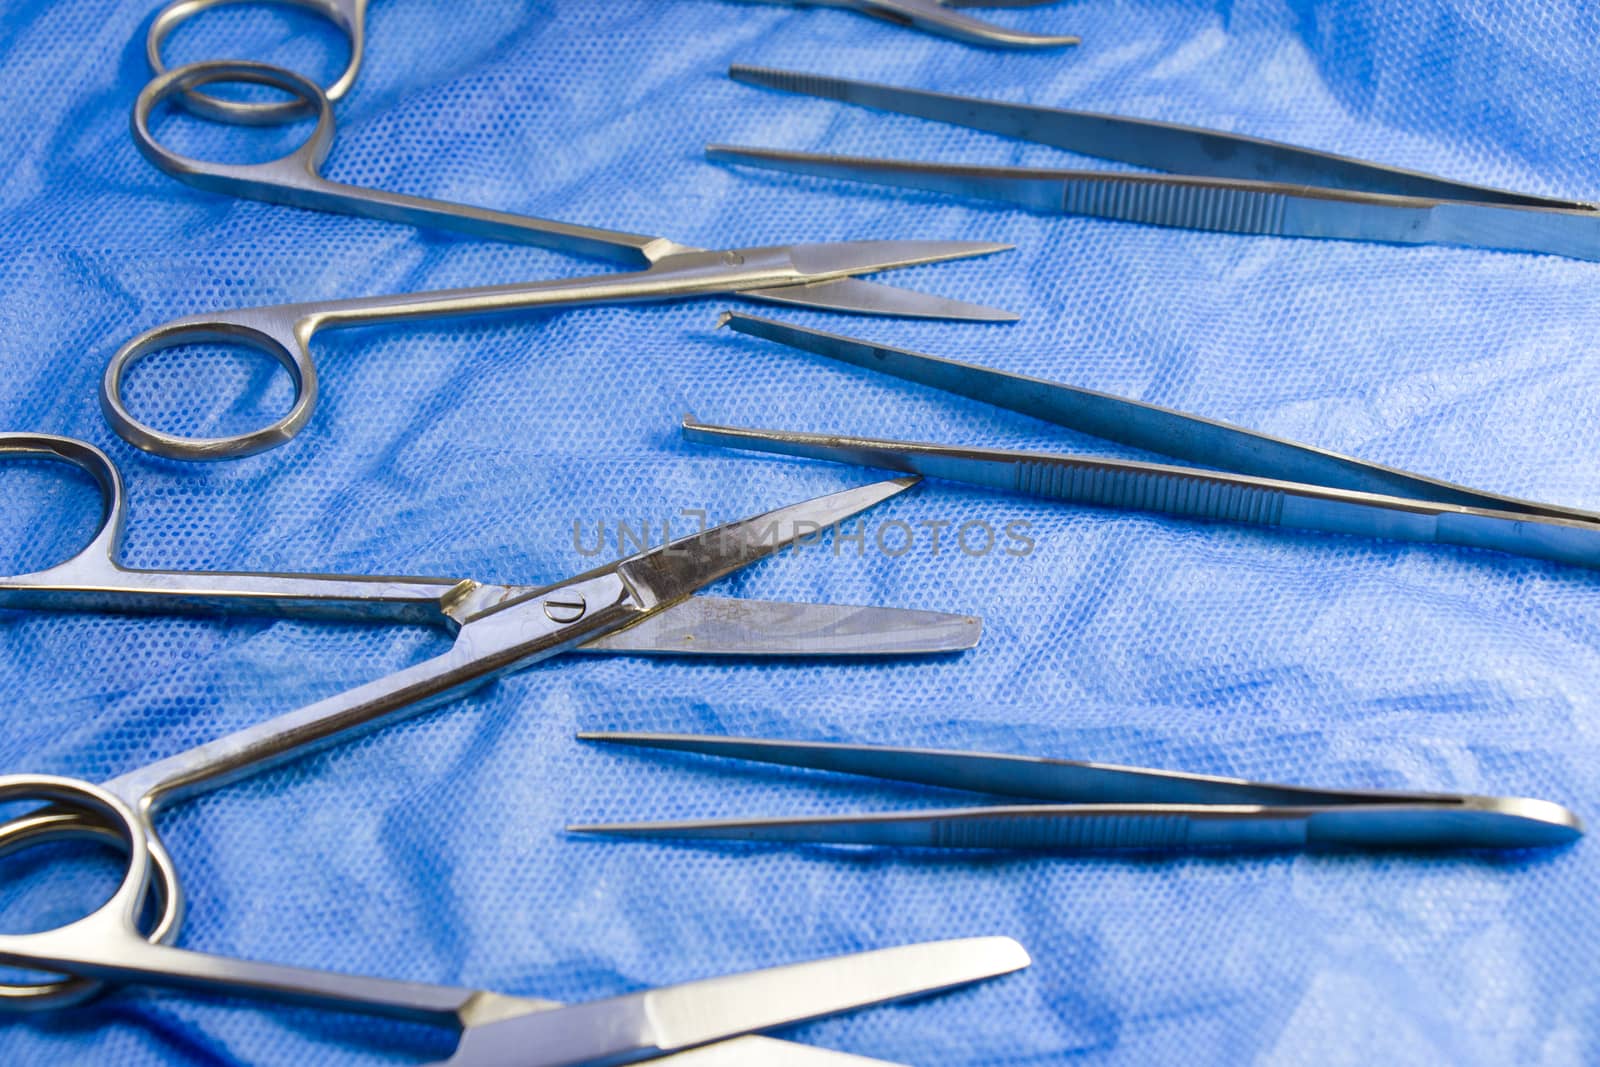 Dissection Kit - Premium Quality Stainless Steel Tools for Medical Students of Anatomy. Surgery instruments. by Taidundua